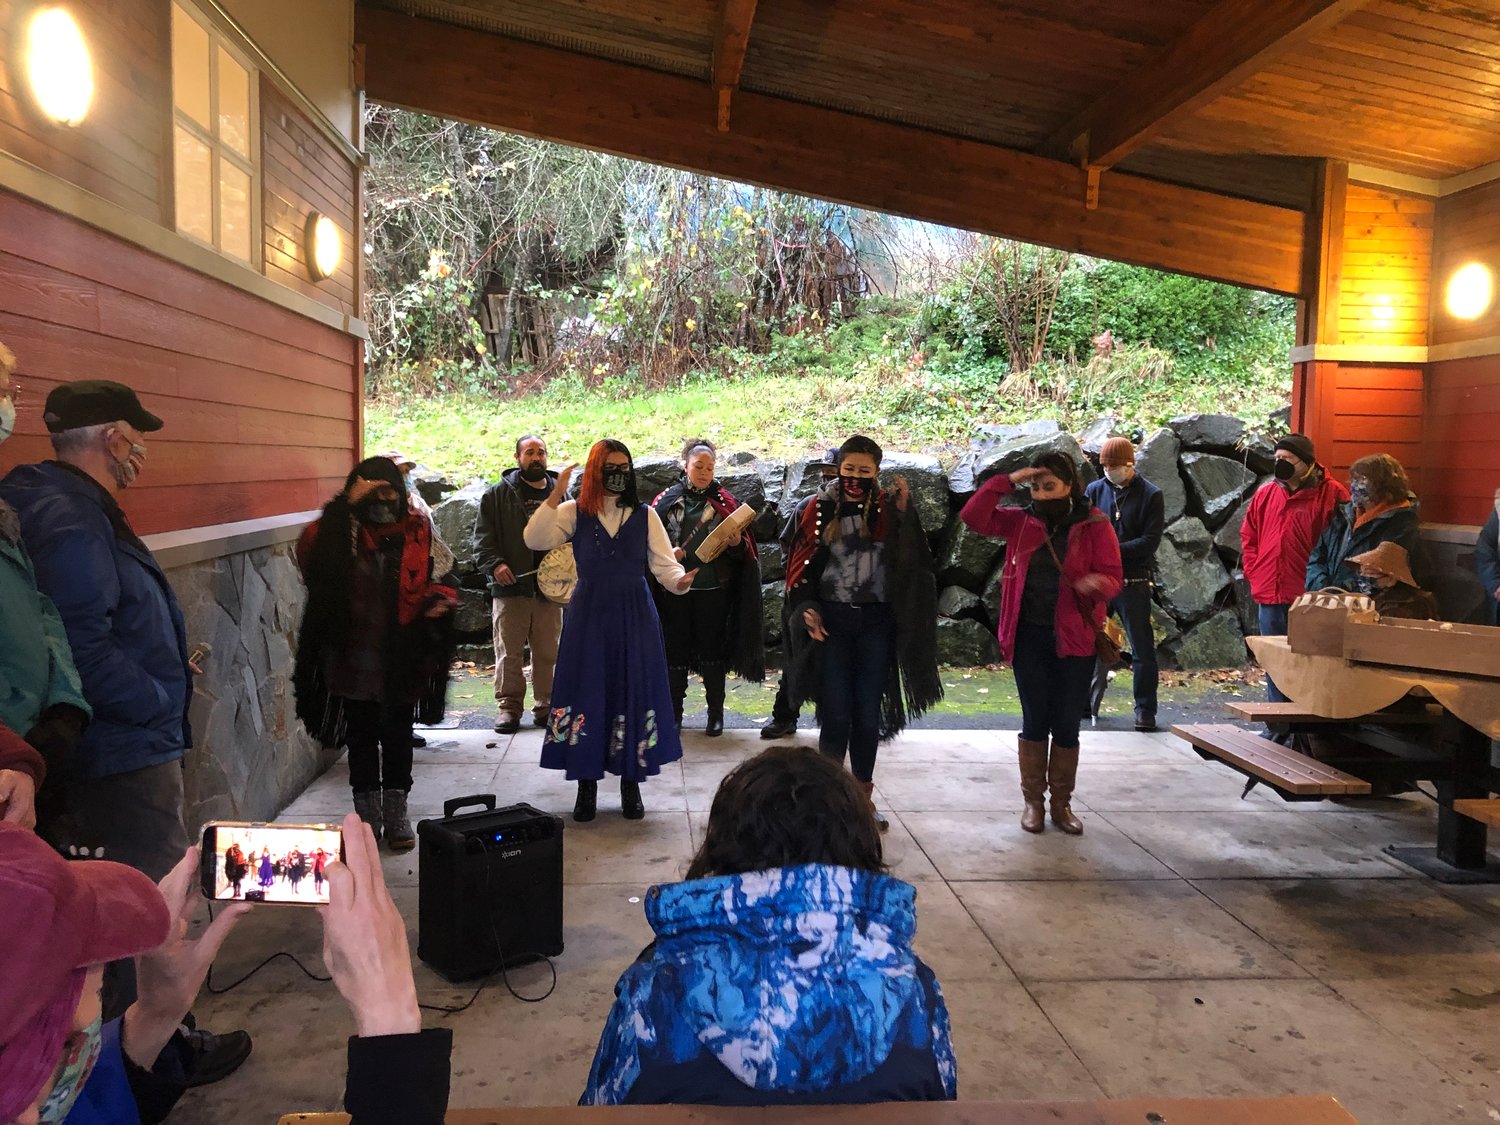 Dancers and singers from the Squaxin Island Tribe performed at the dedication ceremony for "Unity" on Dec. 11, 2021.